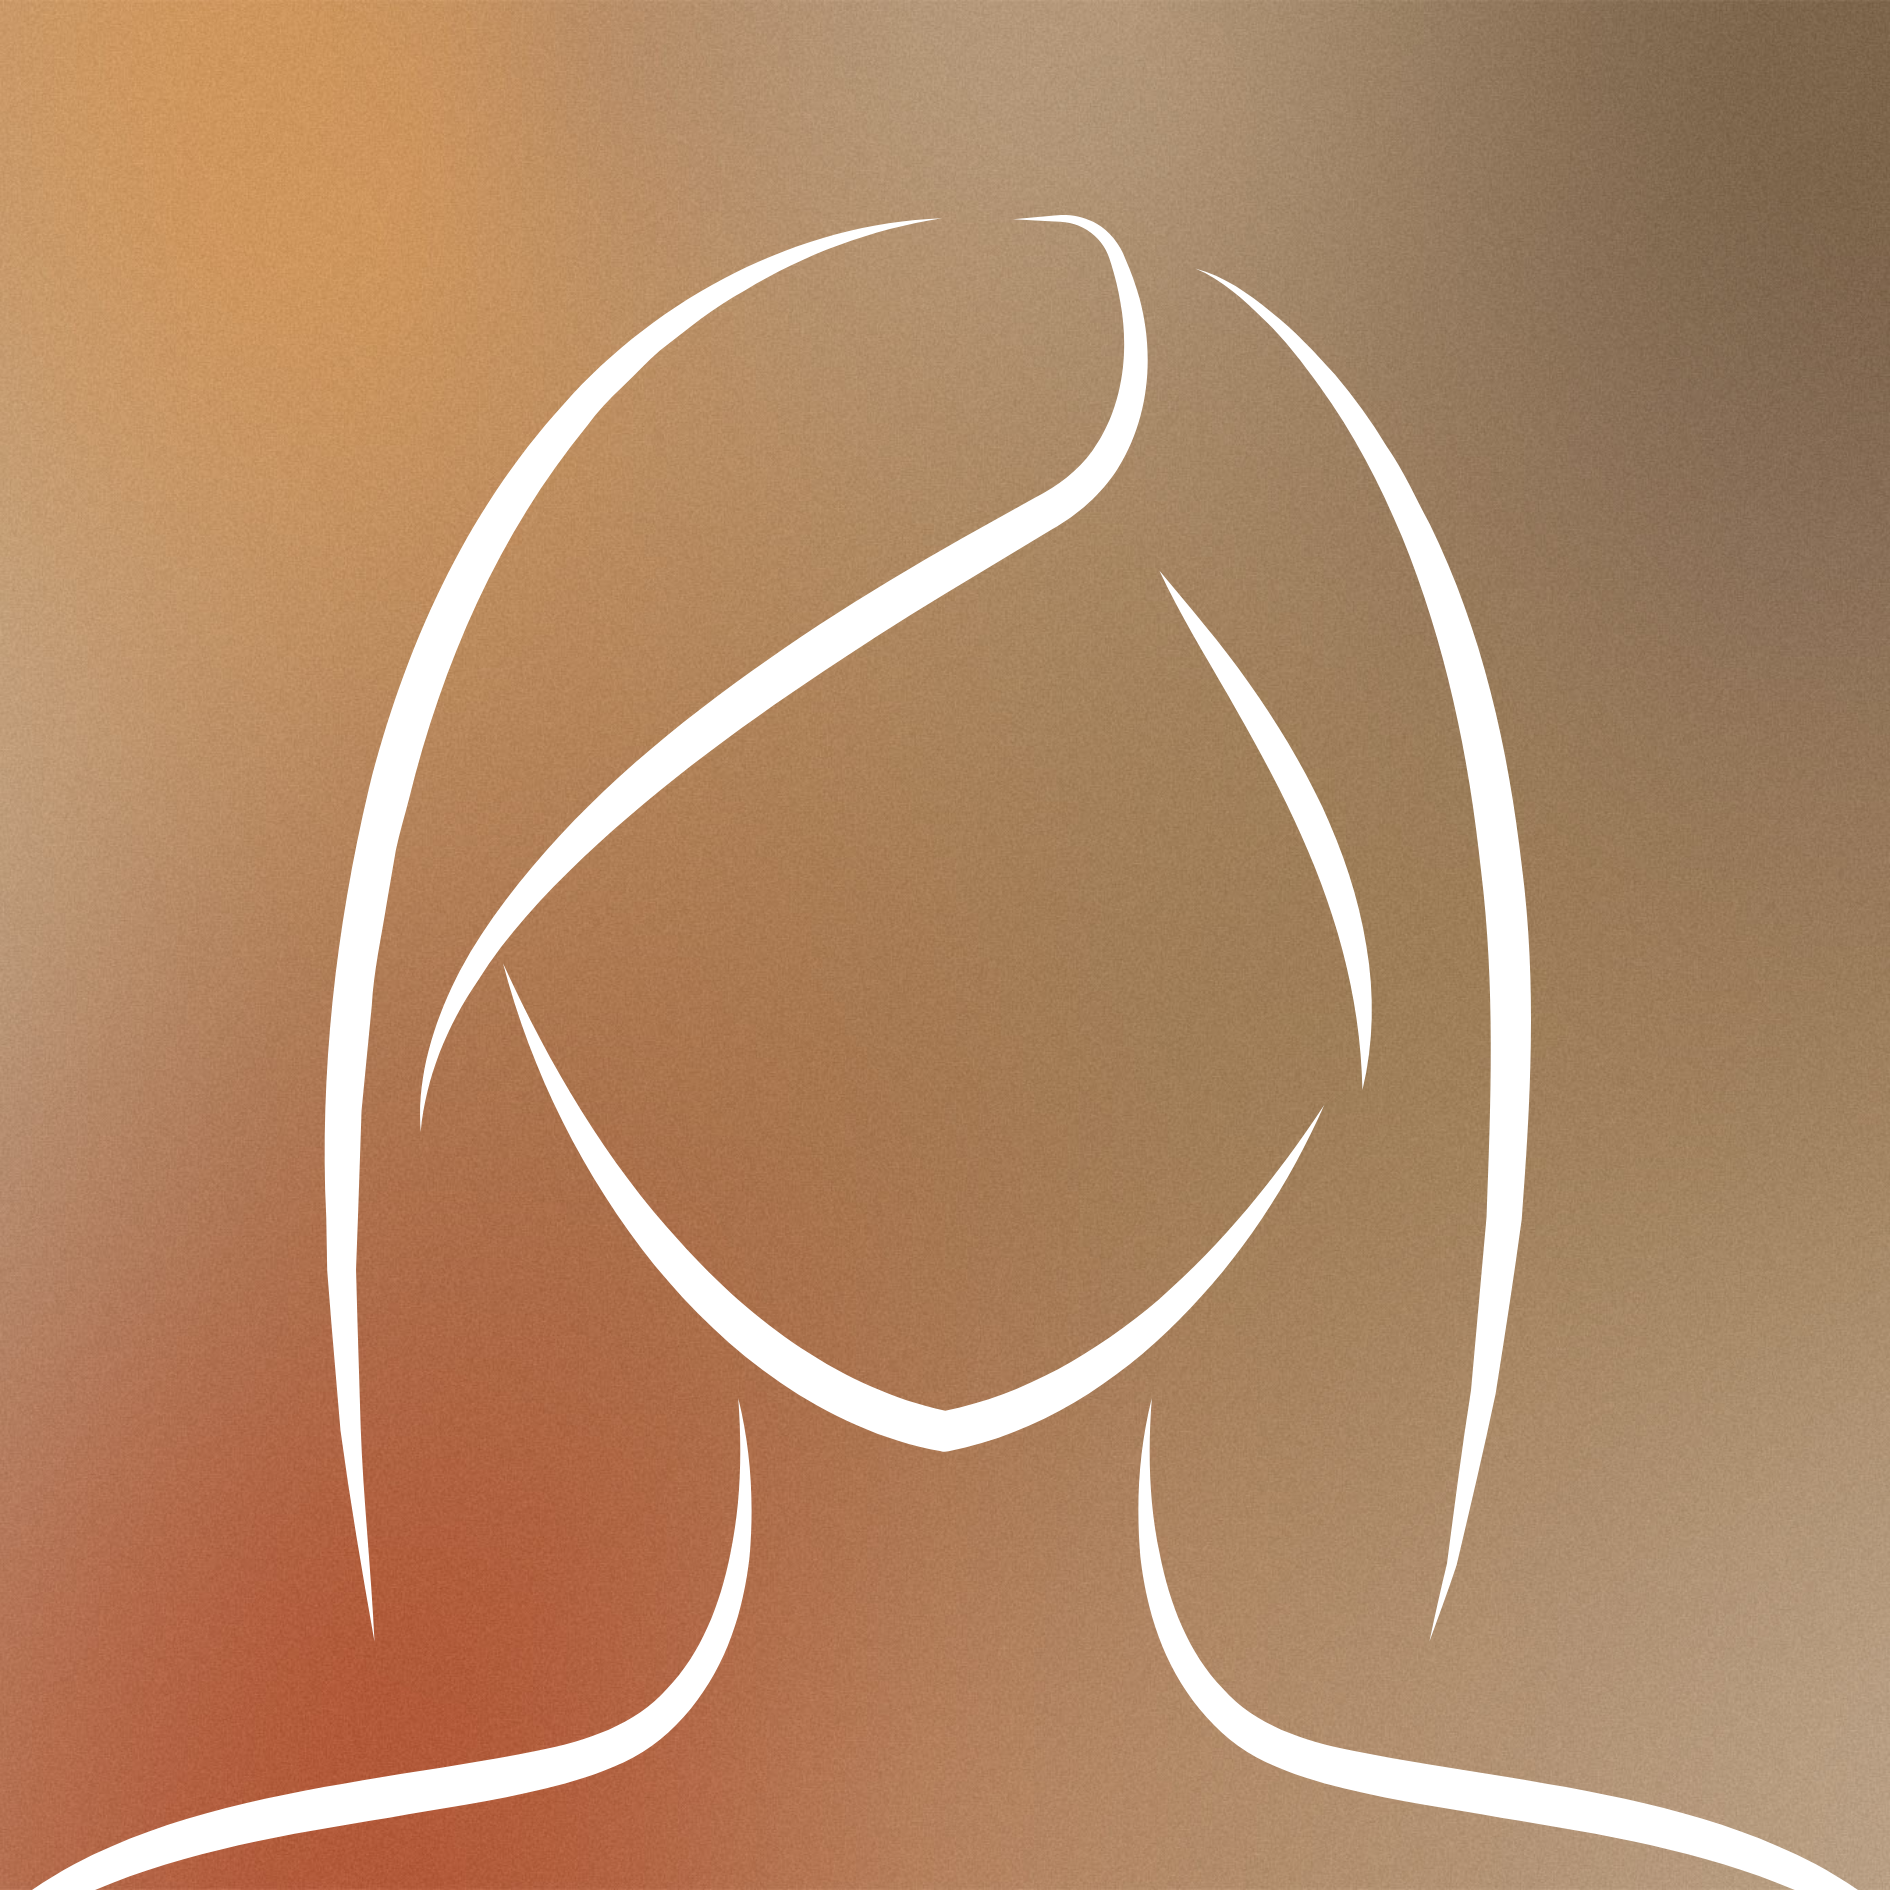 Stylised image of a silhouette profile of a person with a coloured gradient background.